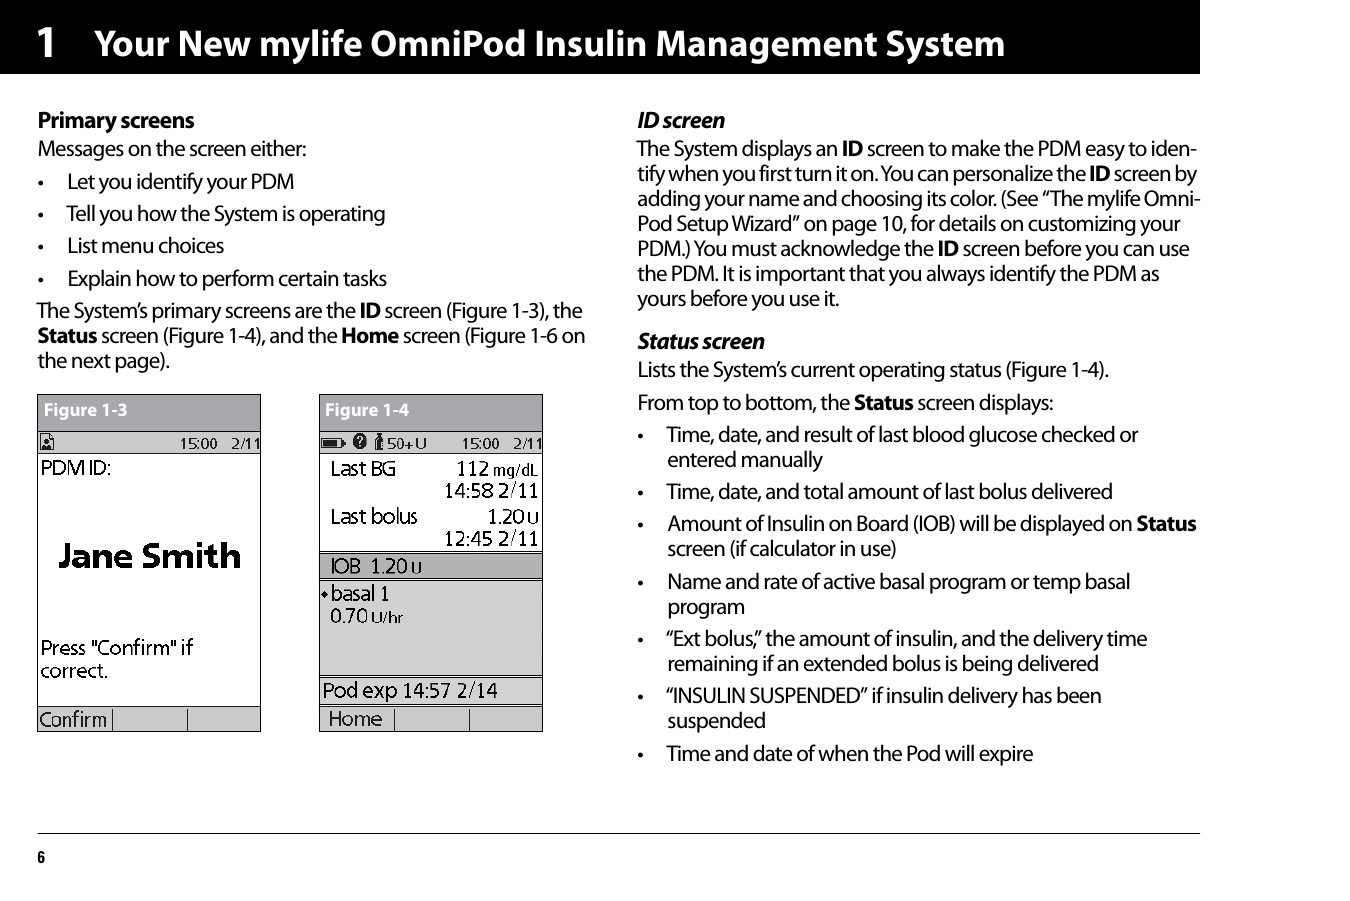 Your New mylife OmniPod Insulin Management System61Primary screensMessages on the screen either:• Let you identify your PDM• Tell you how the System is operating• List menu choices• Explain how to perform certain tasksThe System’s primary screens are the ID screen (Figure 1-3), the Status screen (Figure 1-4), and the Home screen (Figure 1-6 on the next page).ID screenThe System displays an ID screen to make the PDM easy to iden-tify when you first turn it on. You can personalize the ID screen by adding your name and choosing its color. (See “The mylife Omni-Pod Setup Wizard” on page 10, for details on customizing your PDM.) You must acknowledge the ID screen before you can use the PDM. It is important that you always identify the PDM as yours before you use it.Status screenLists the System’s current operating status (Figure 1-4).From top to bottom, the Status screen displays:• Time, date, and result of last blood glucose checked or entered manually• Time, date, and total amount of last bolus delivered• Amount of Insulin on Board (IOB) will be displayed on Status screen (if calculator in use) • Name and rate of active basal program or temp basal program • “Ext bolus,” the amount of insulin, and the delivery time remaining if an extended bolus is being delivered• “INSULIN SUSPENDED” if insulin delivery has been suspended • Time and date of when the Pod will expire  Figure 1-3 Figure 1-4